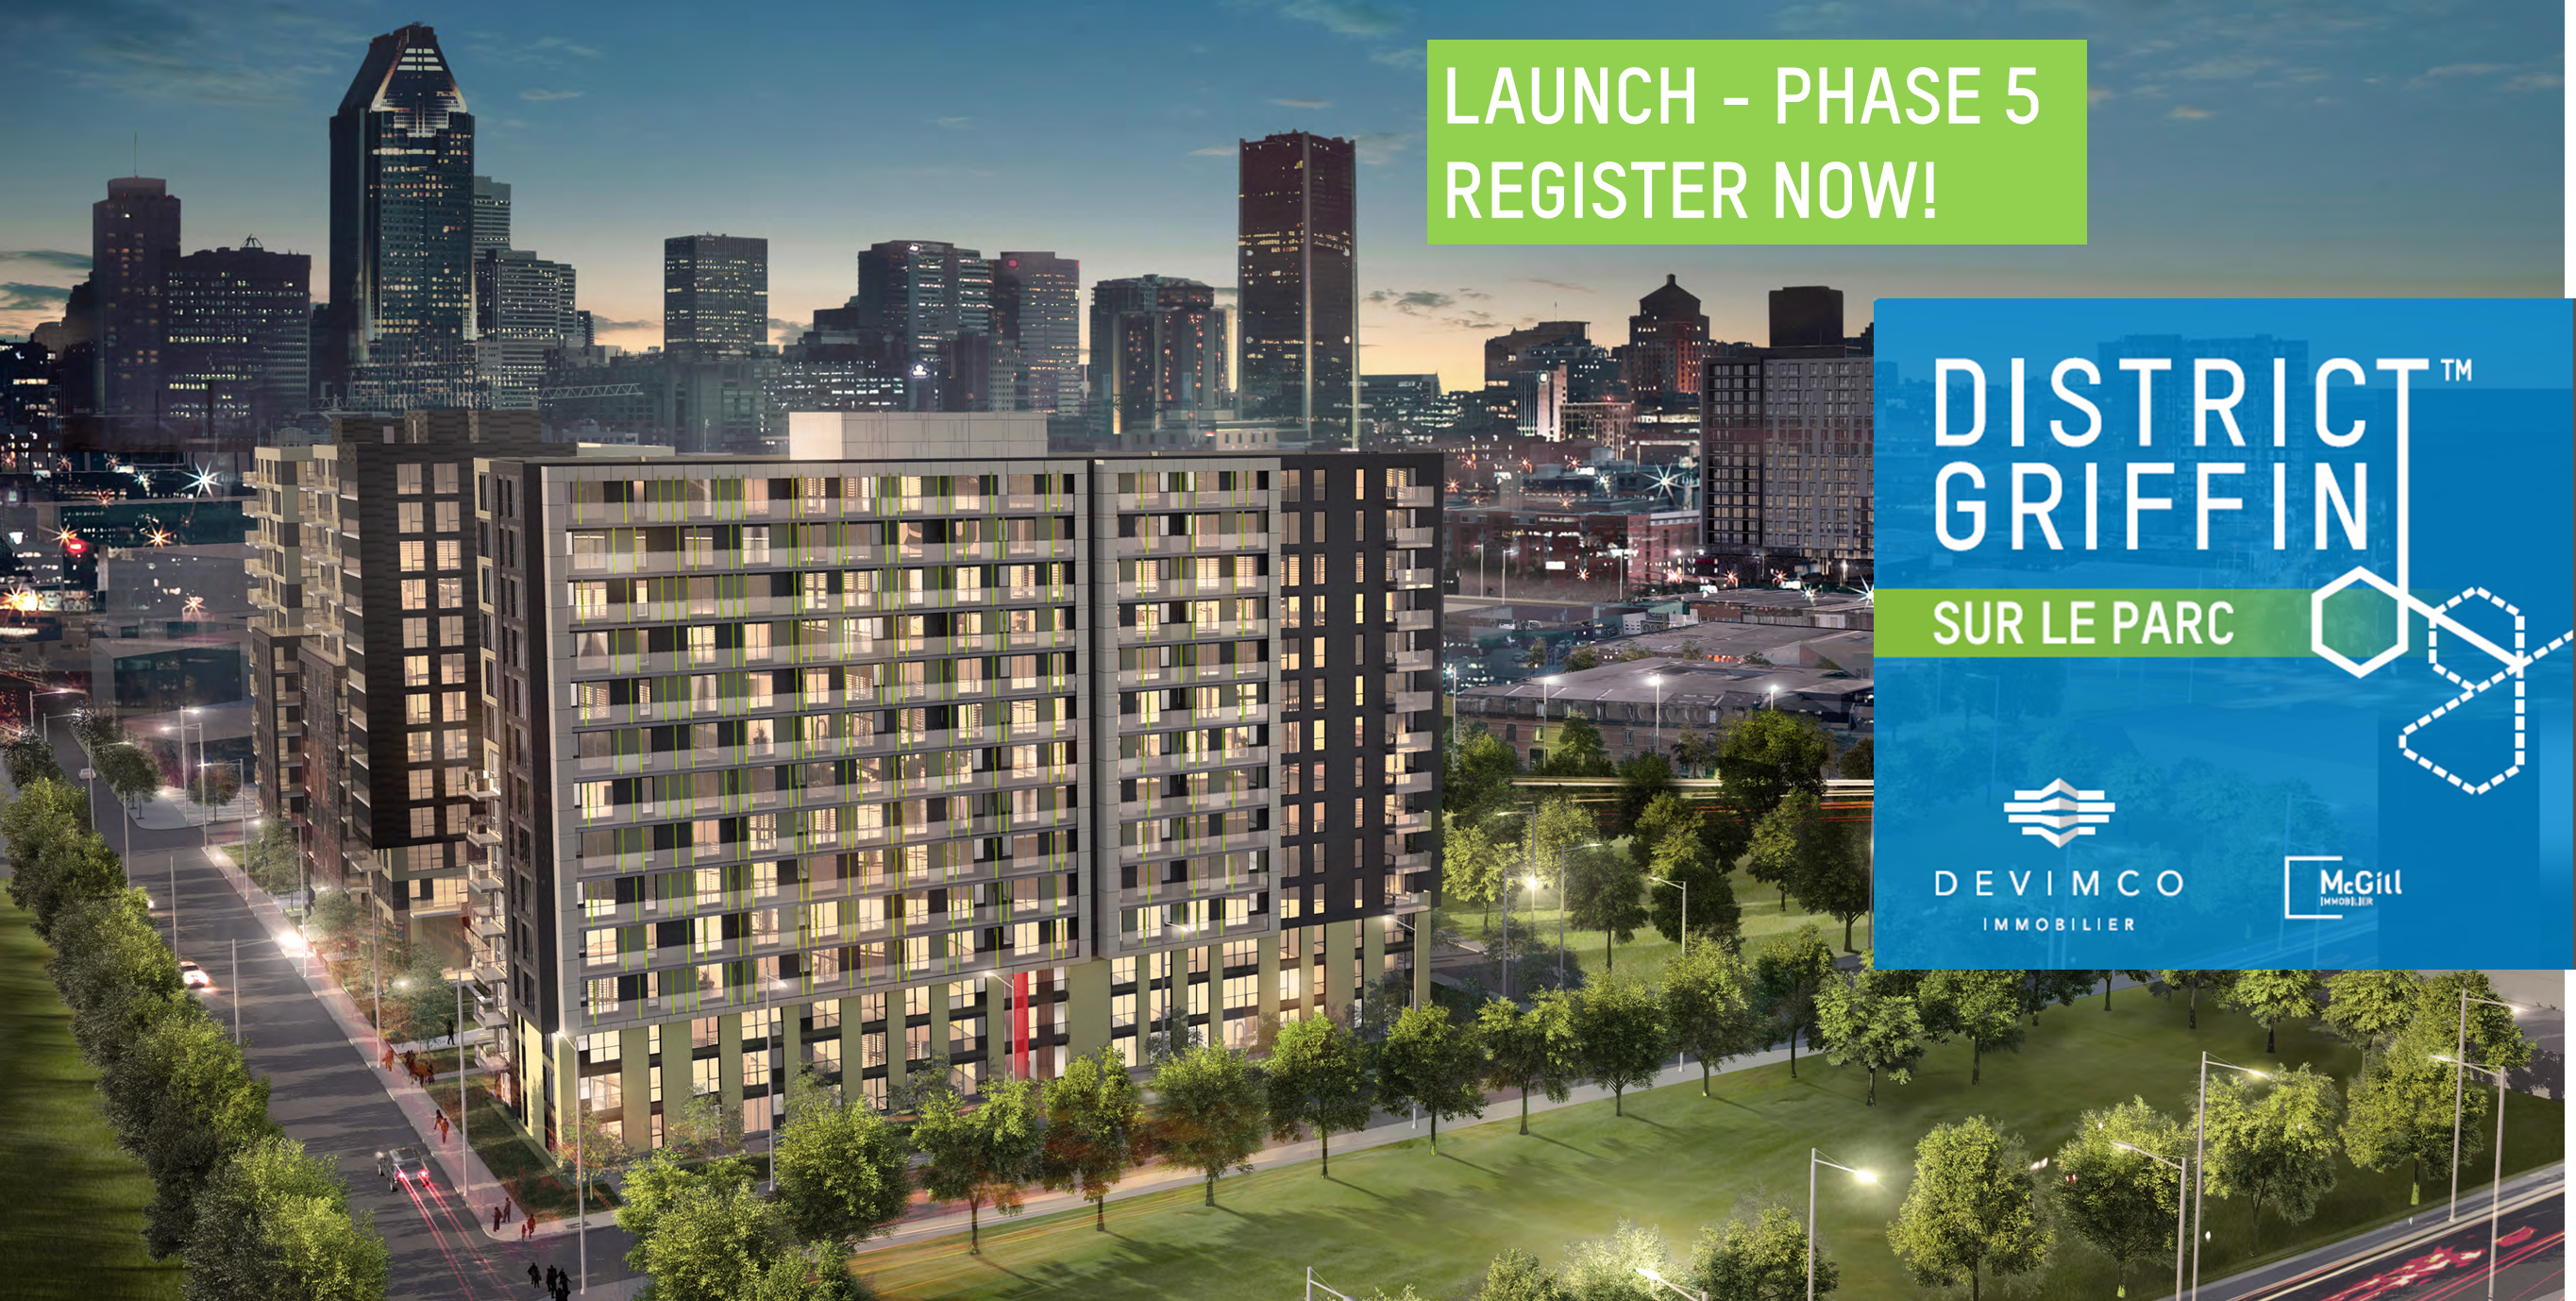 Have you signed up for the launch of Phase 5 - District Griffin sur le Parc yet?  If you haven’t, do it now!